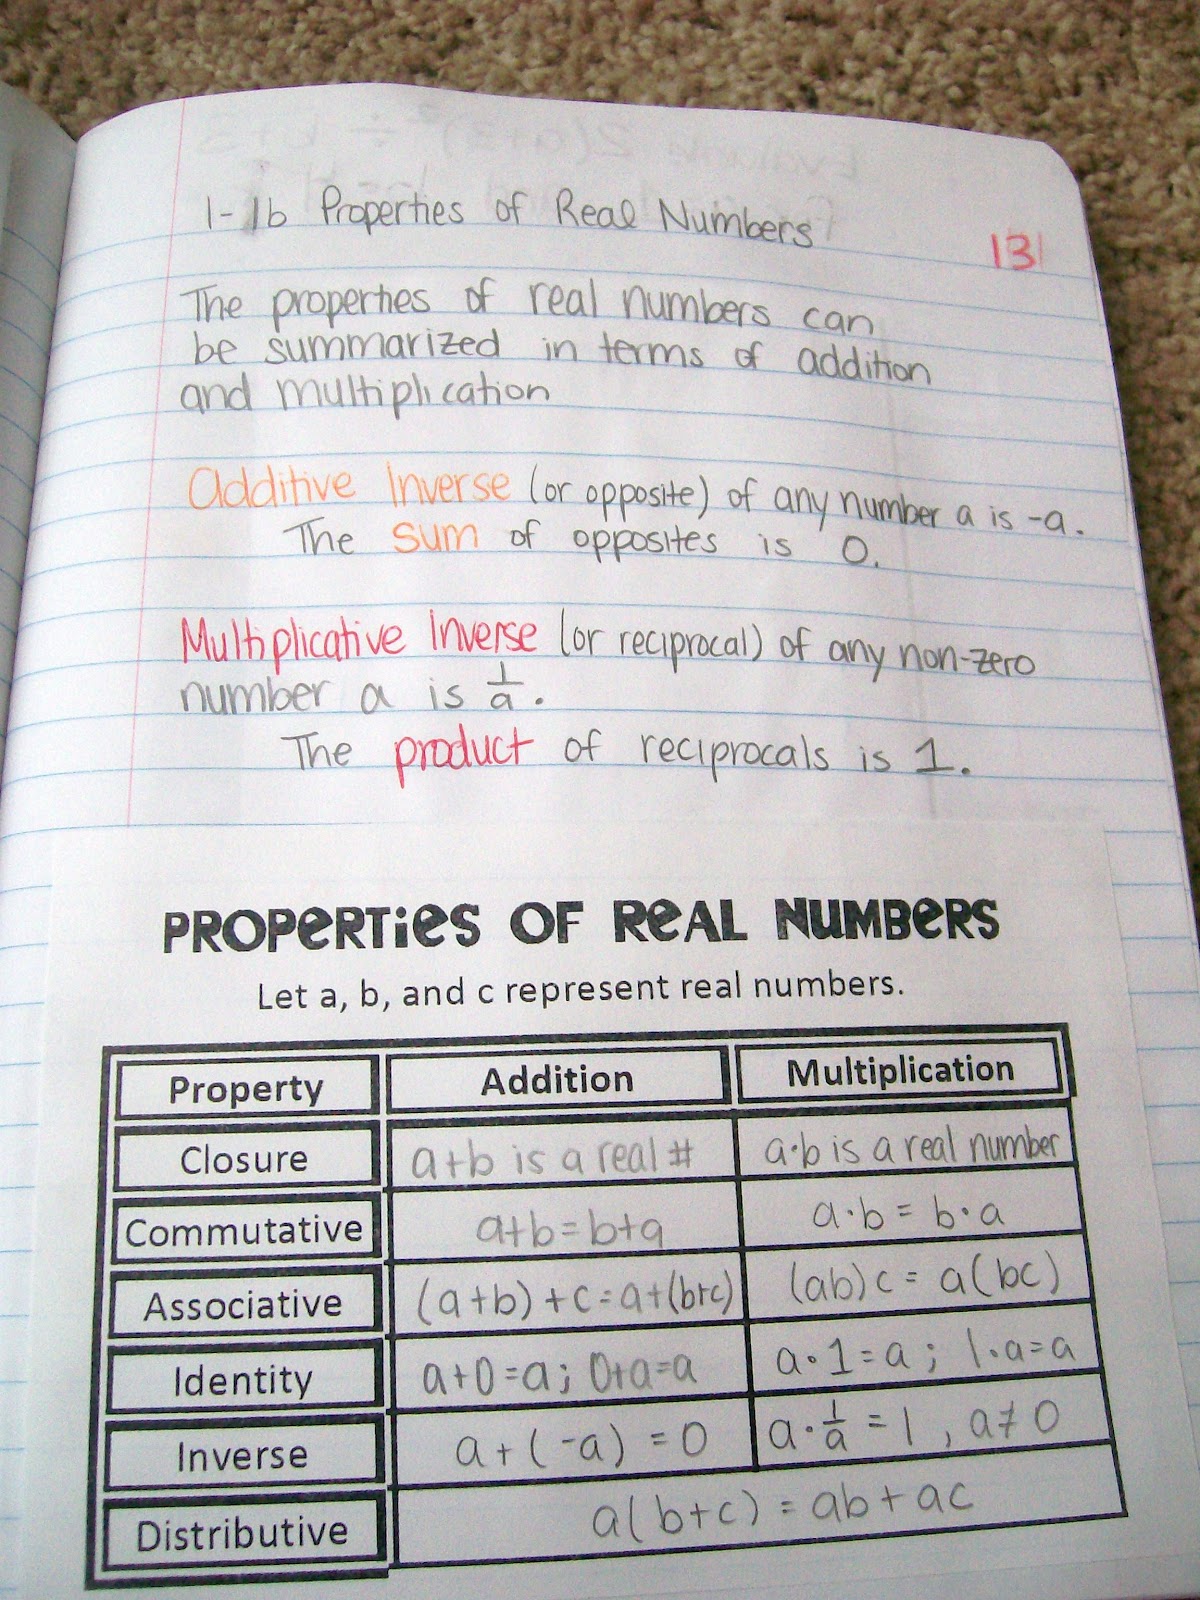 properties of real numbers graphic organizer for algebra interactive notebook inb